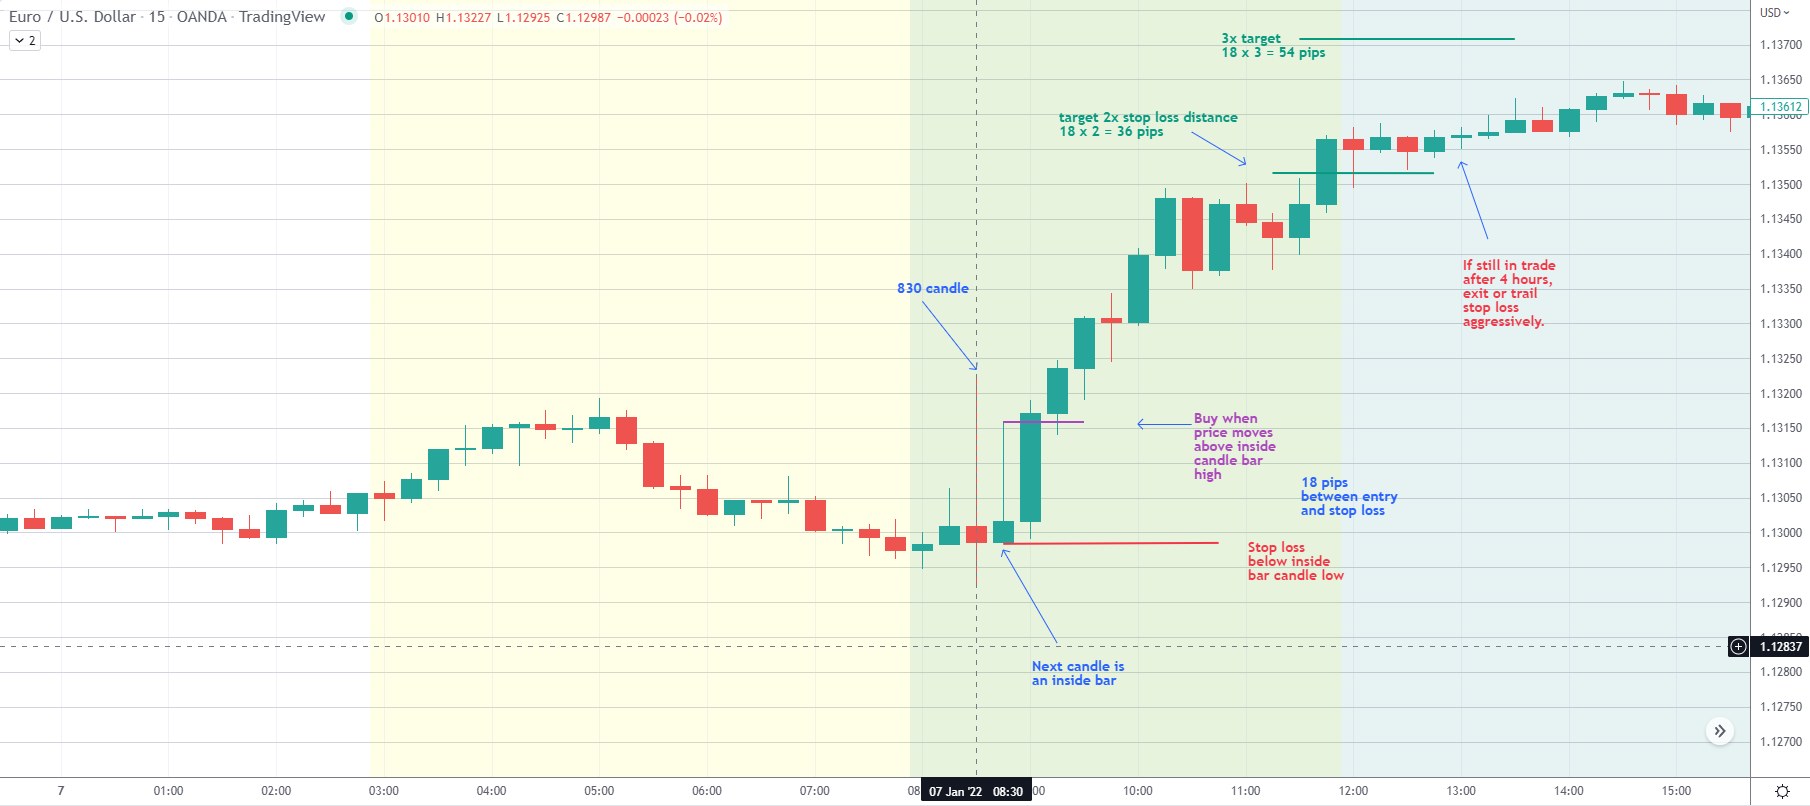 NFP EURUSD day trading strategy Jan 7 2022  example